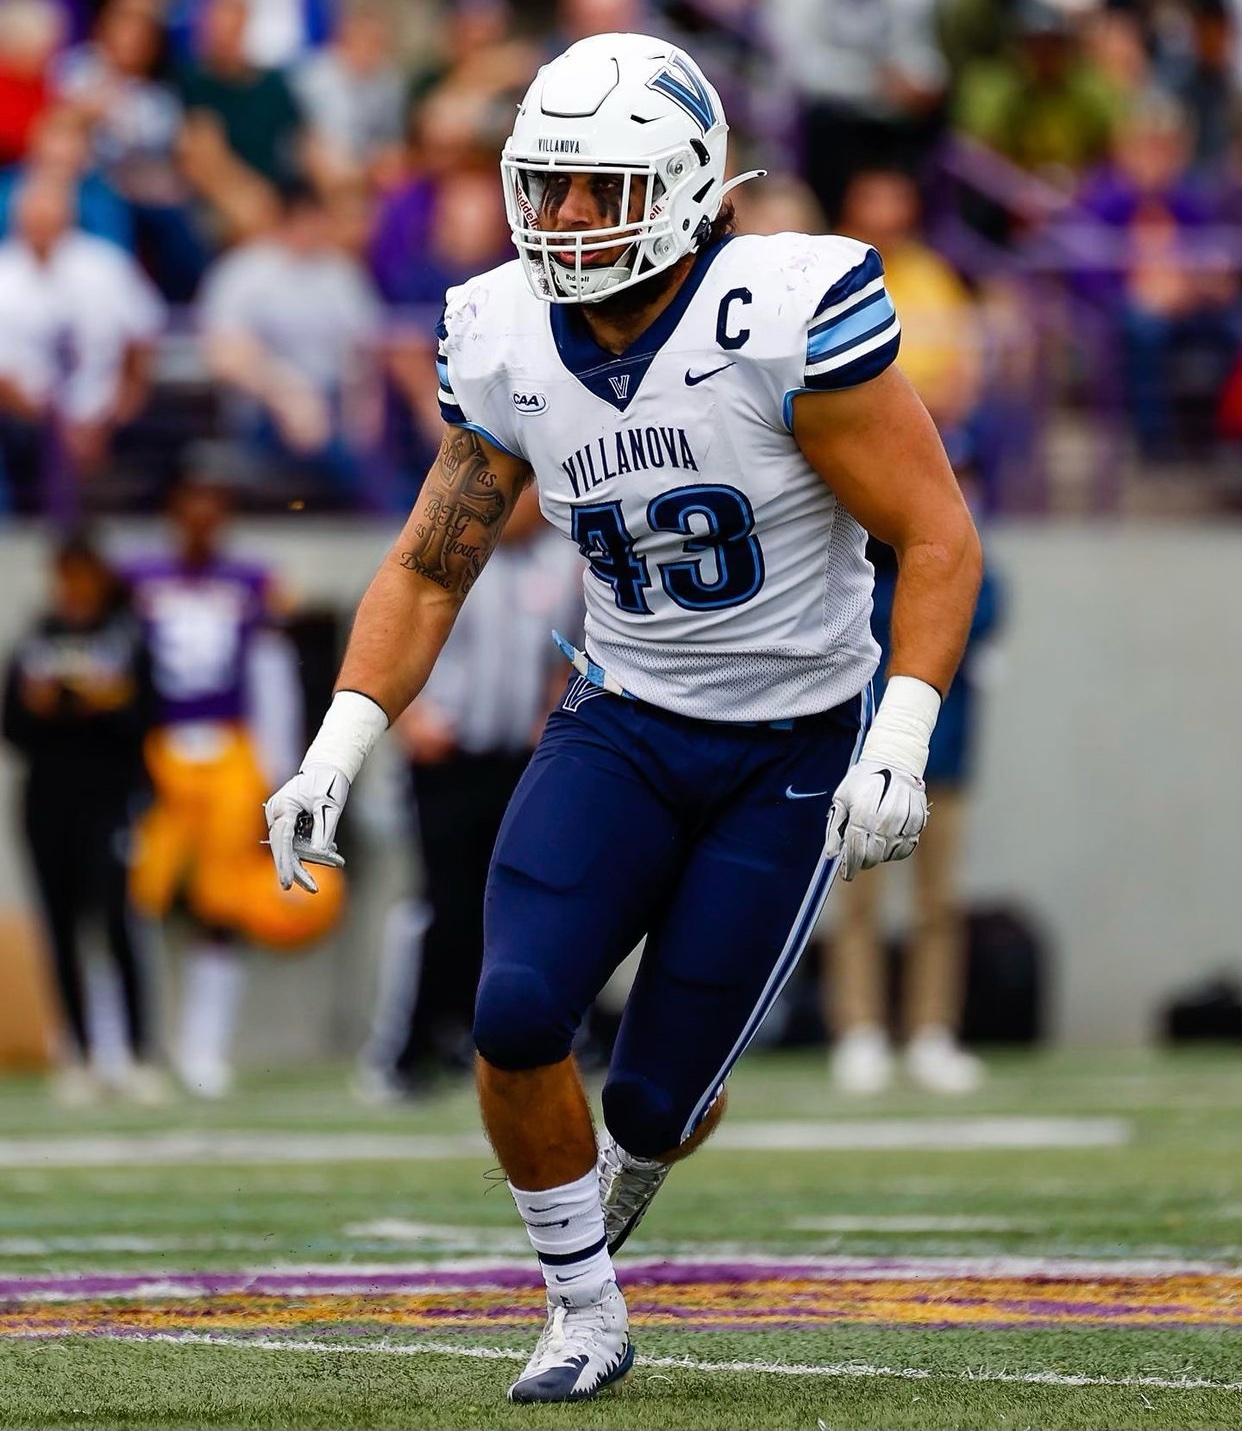 Forrest Rhyne signs with Colts as undrafted free agent